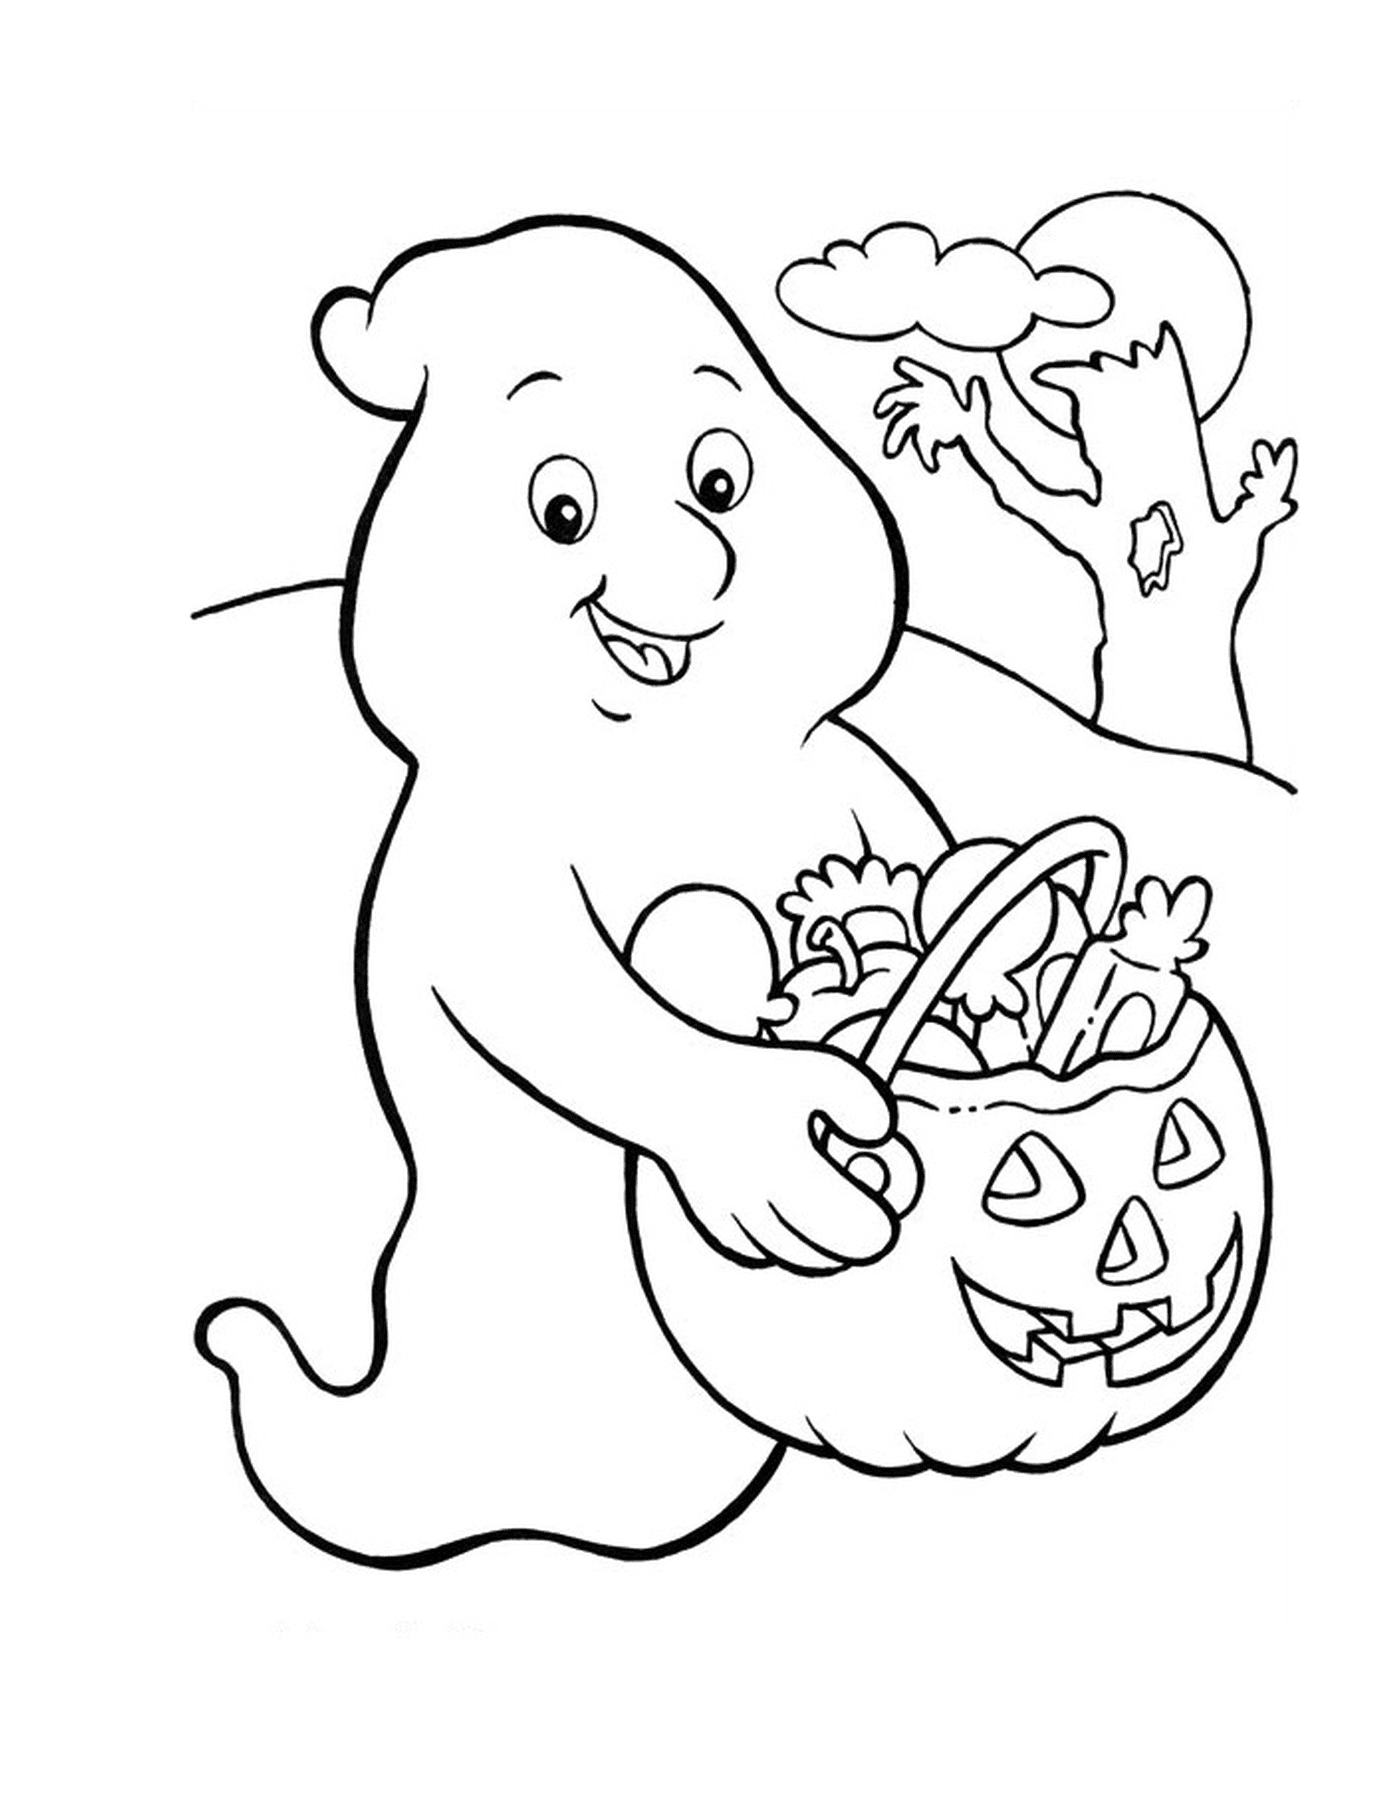  Ghost offering Halloween candy 